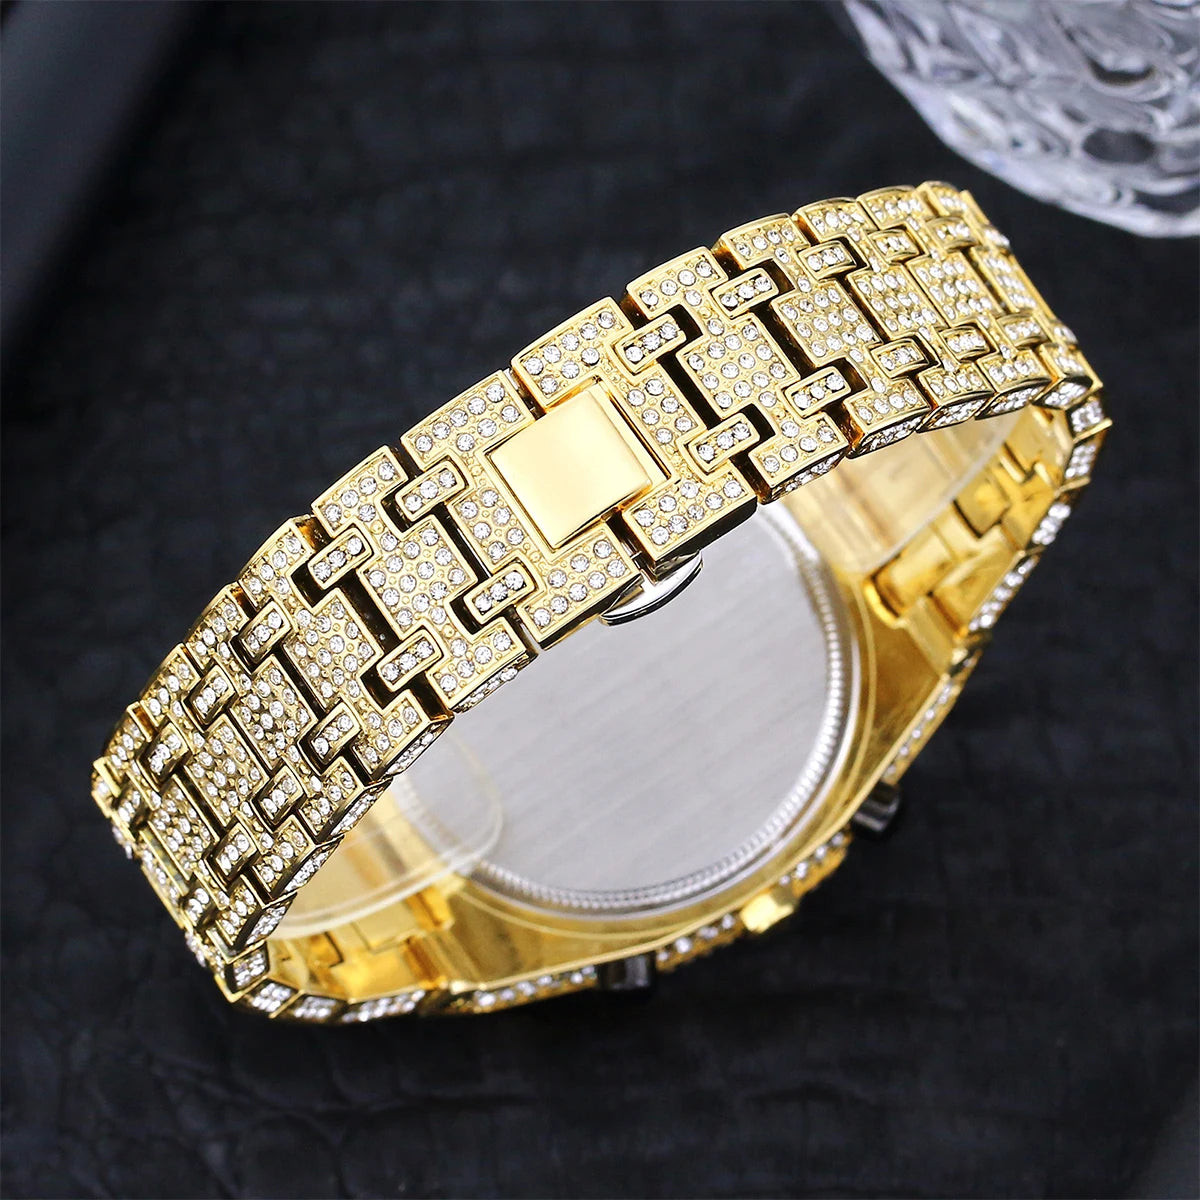 LUXURY BUST DOWN ARABIC NUMERALS ICED OUT DIAMOND WATCH - GOLD/WHITE GOLD